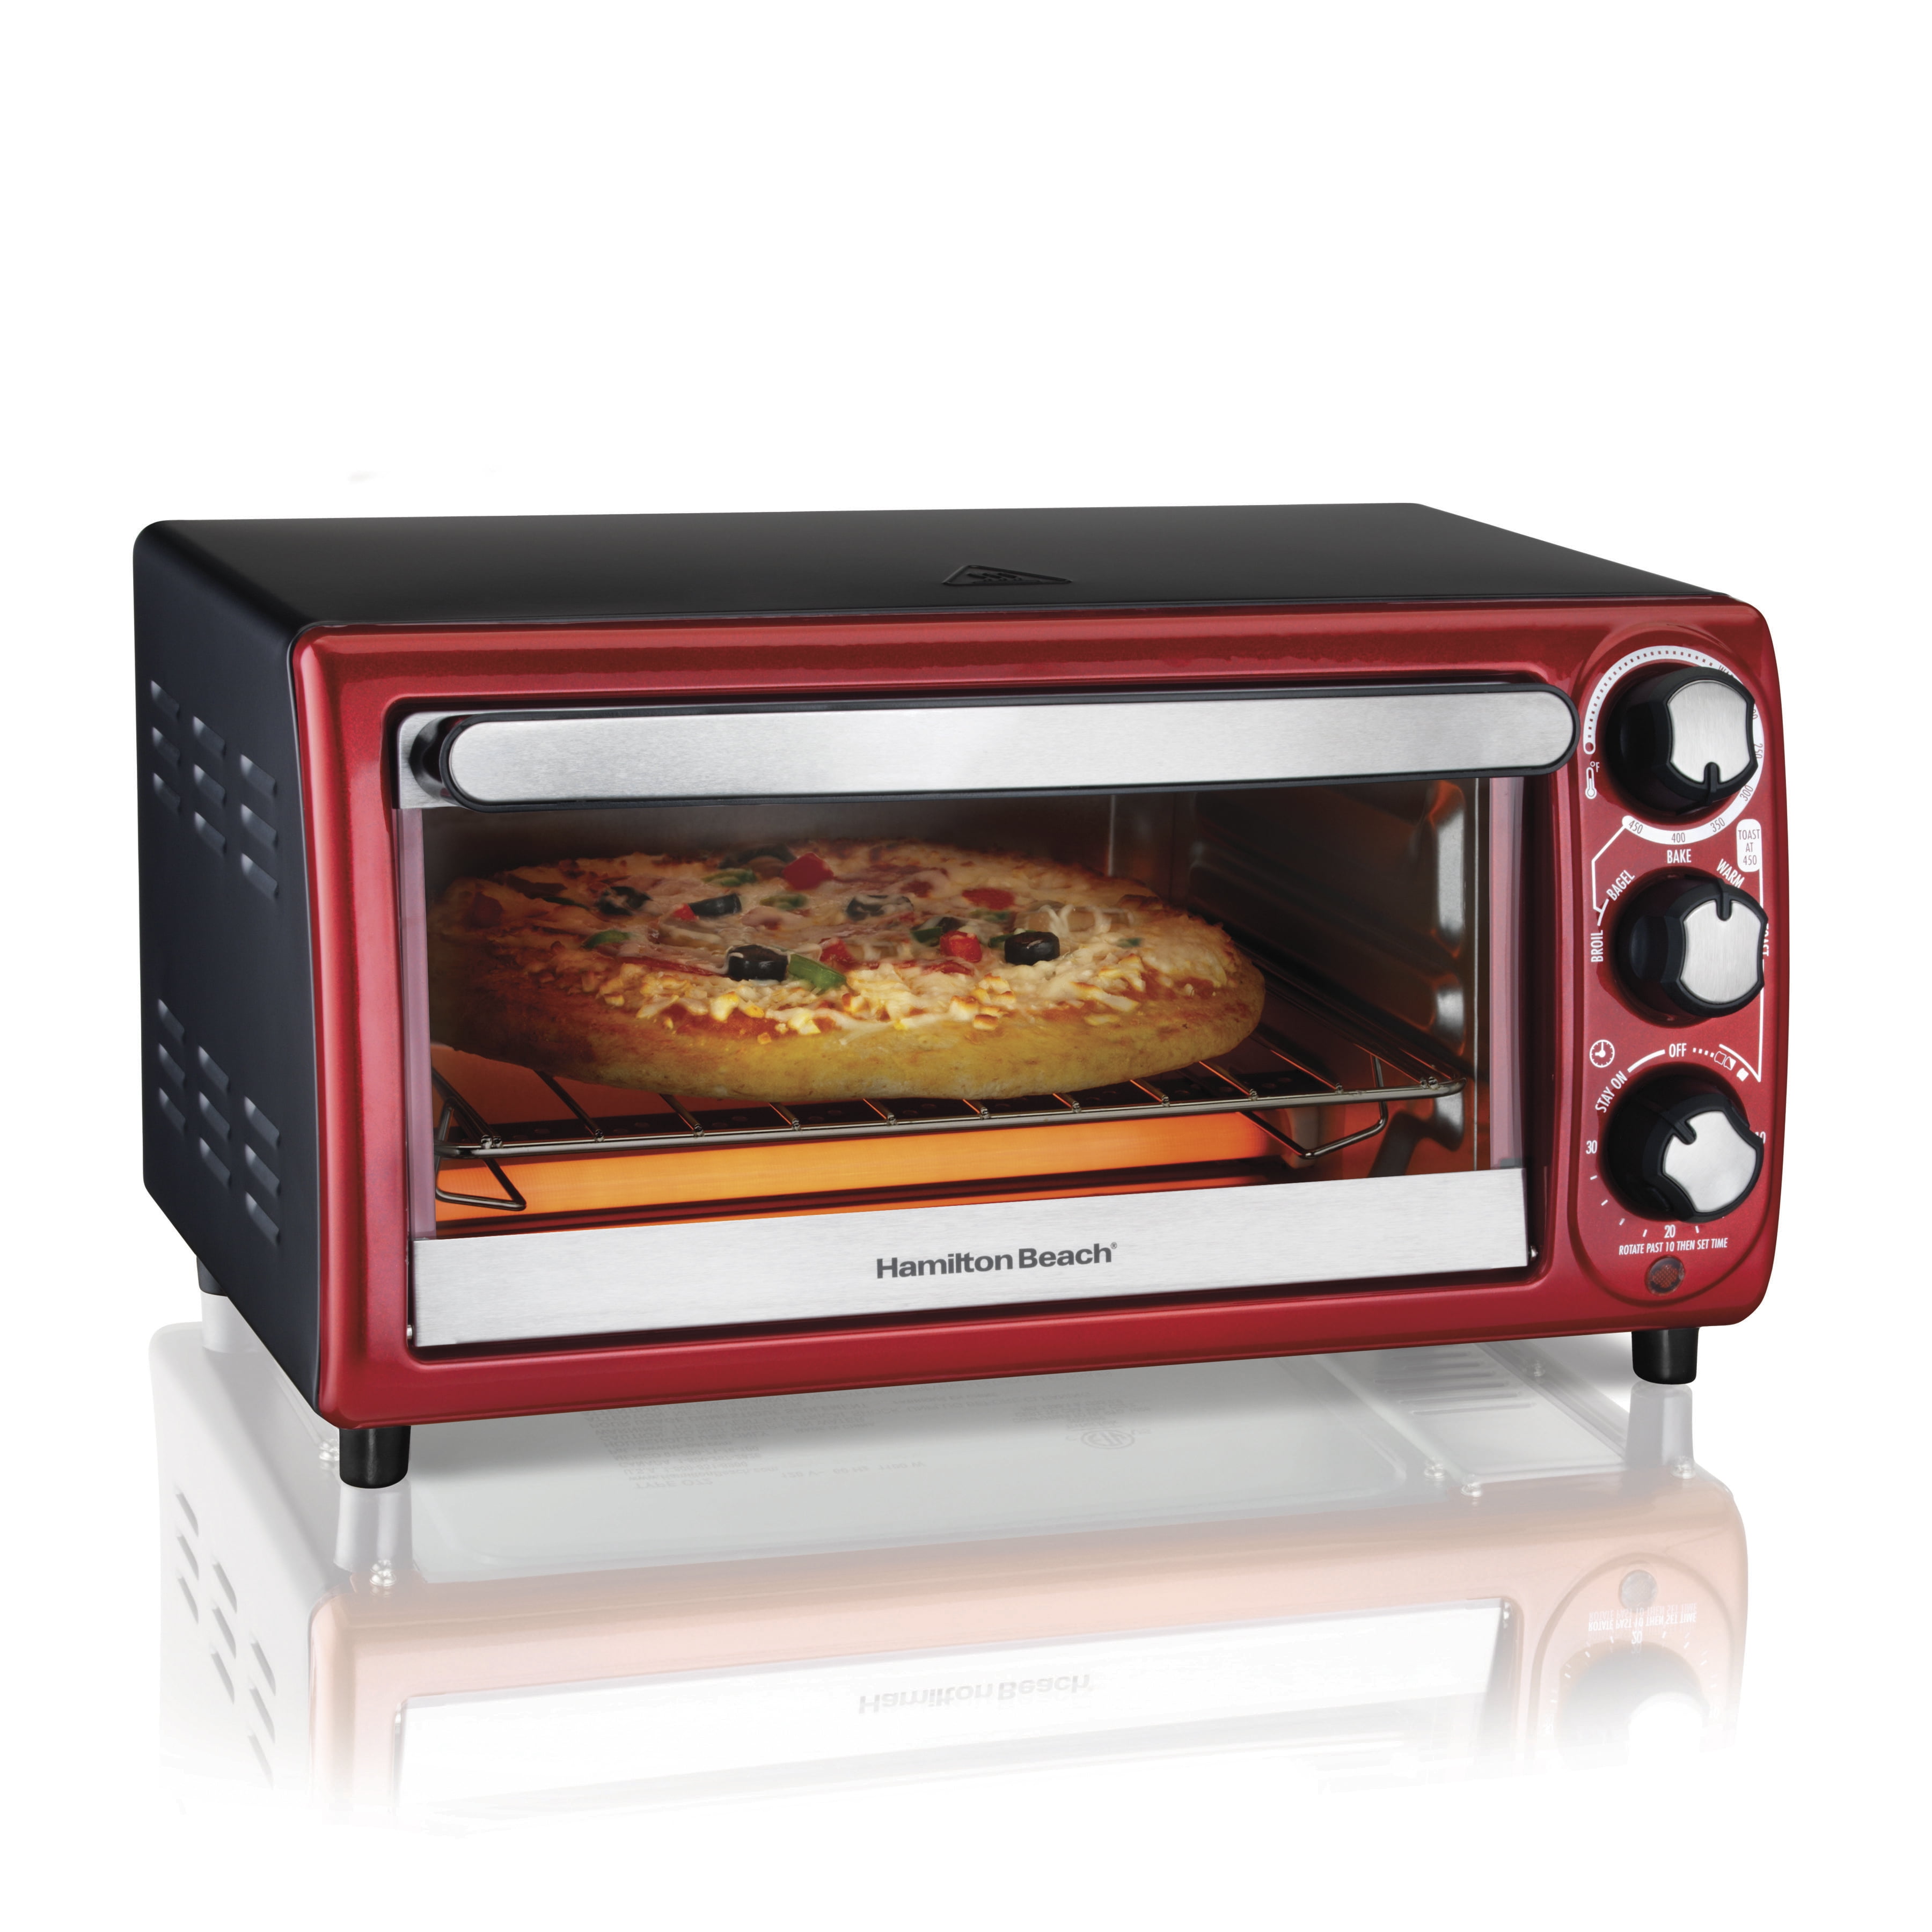 Color : Black LZMXMYS Toaster oven,Compact Mini Electric Oven,Mini Oven and Grill with Double Hot Plates,Mini Oven with Electric Grill,Mini Household Baking Oven 30 Minutes Rotation Timing 